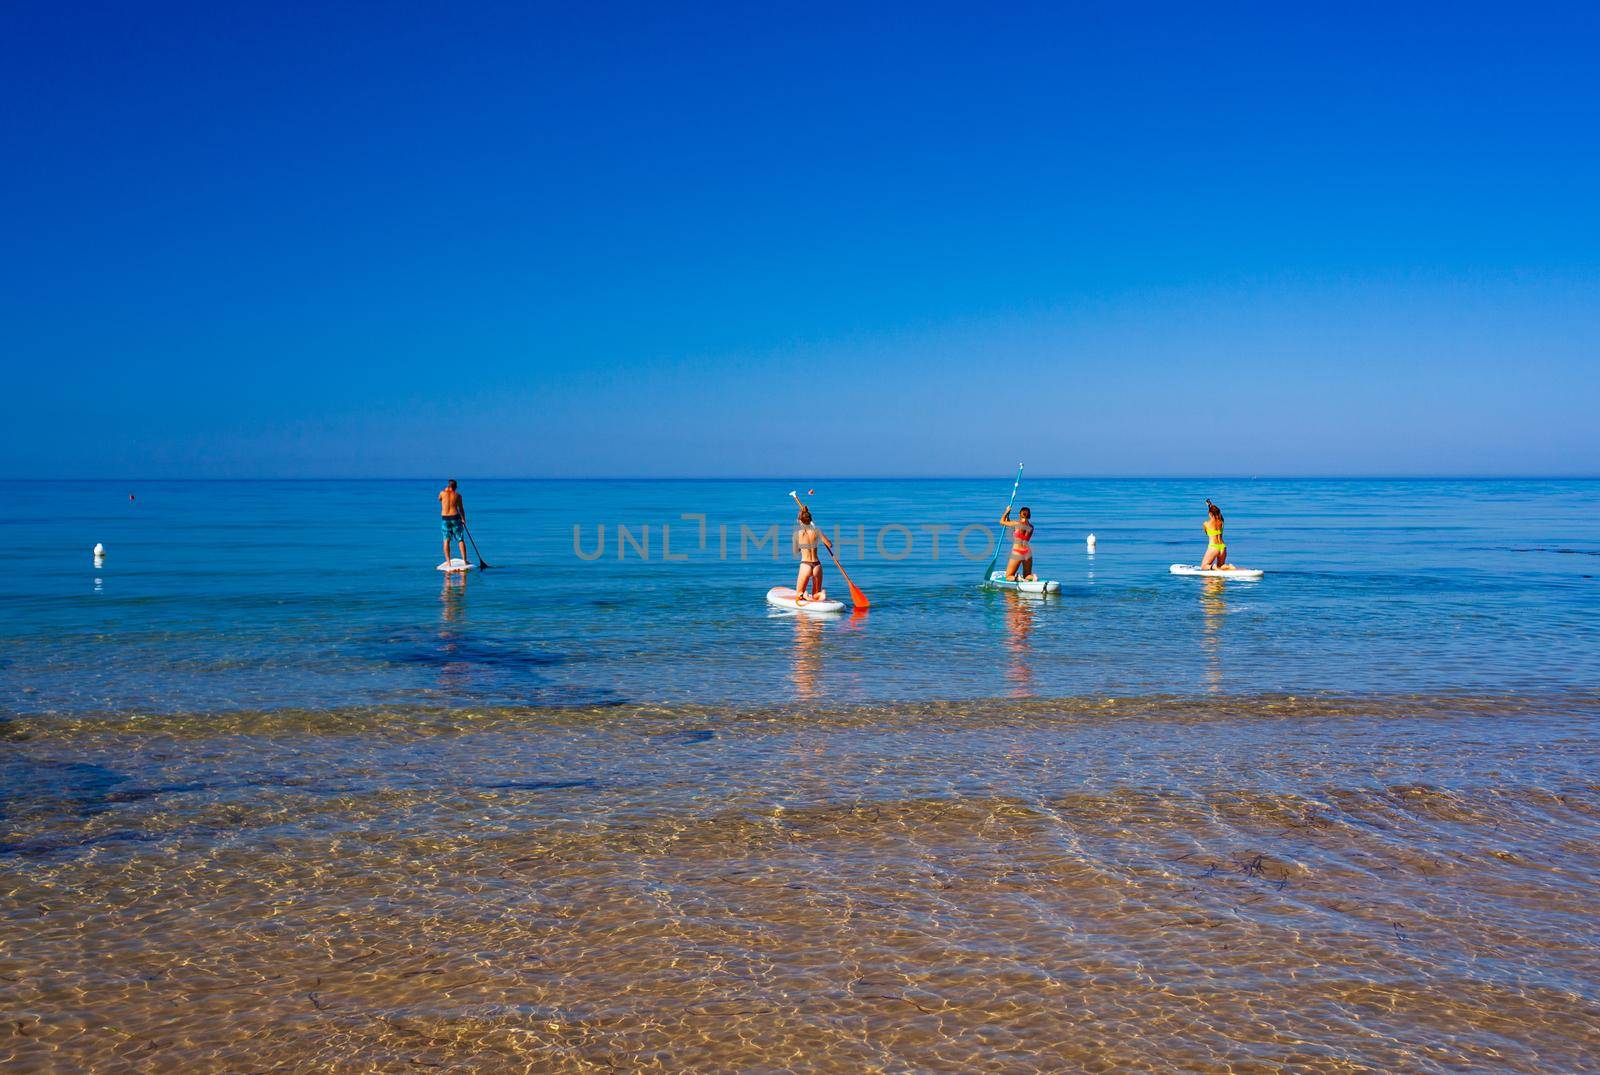 Stand up paddle boarding. Joyful group of friendsare training SUP board in the mediterranean sea on a sunny morning in Realmonte beach by bepsimage